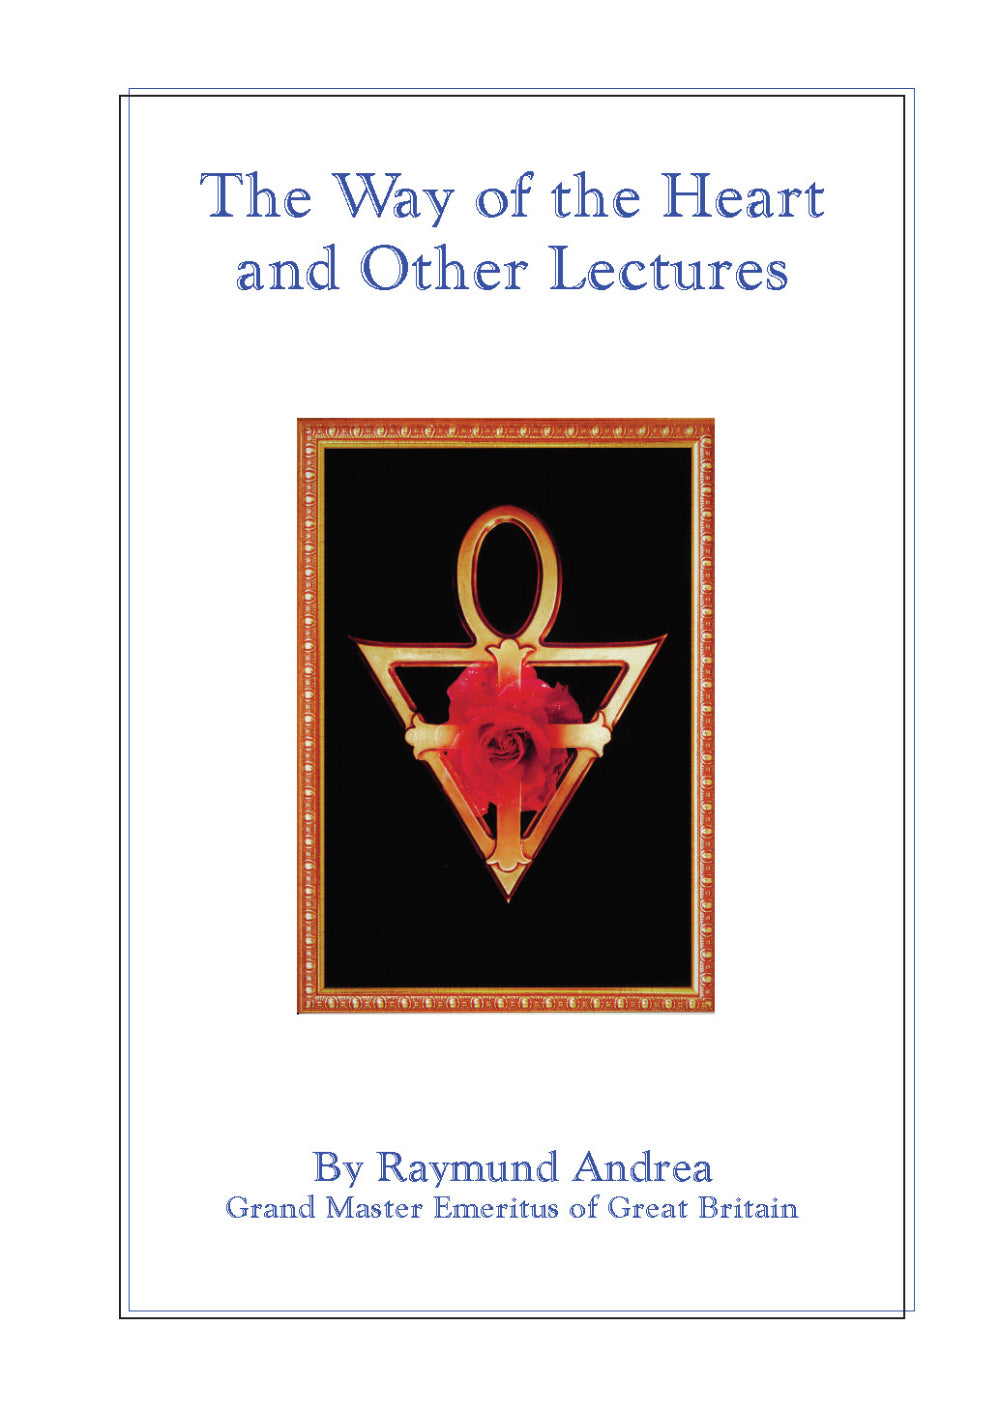 Way of the Heart and Other Lectures, The ﻿- Available to members only.